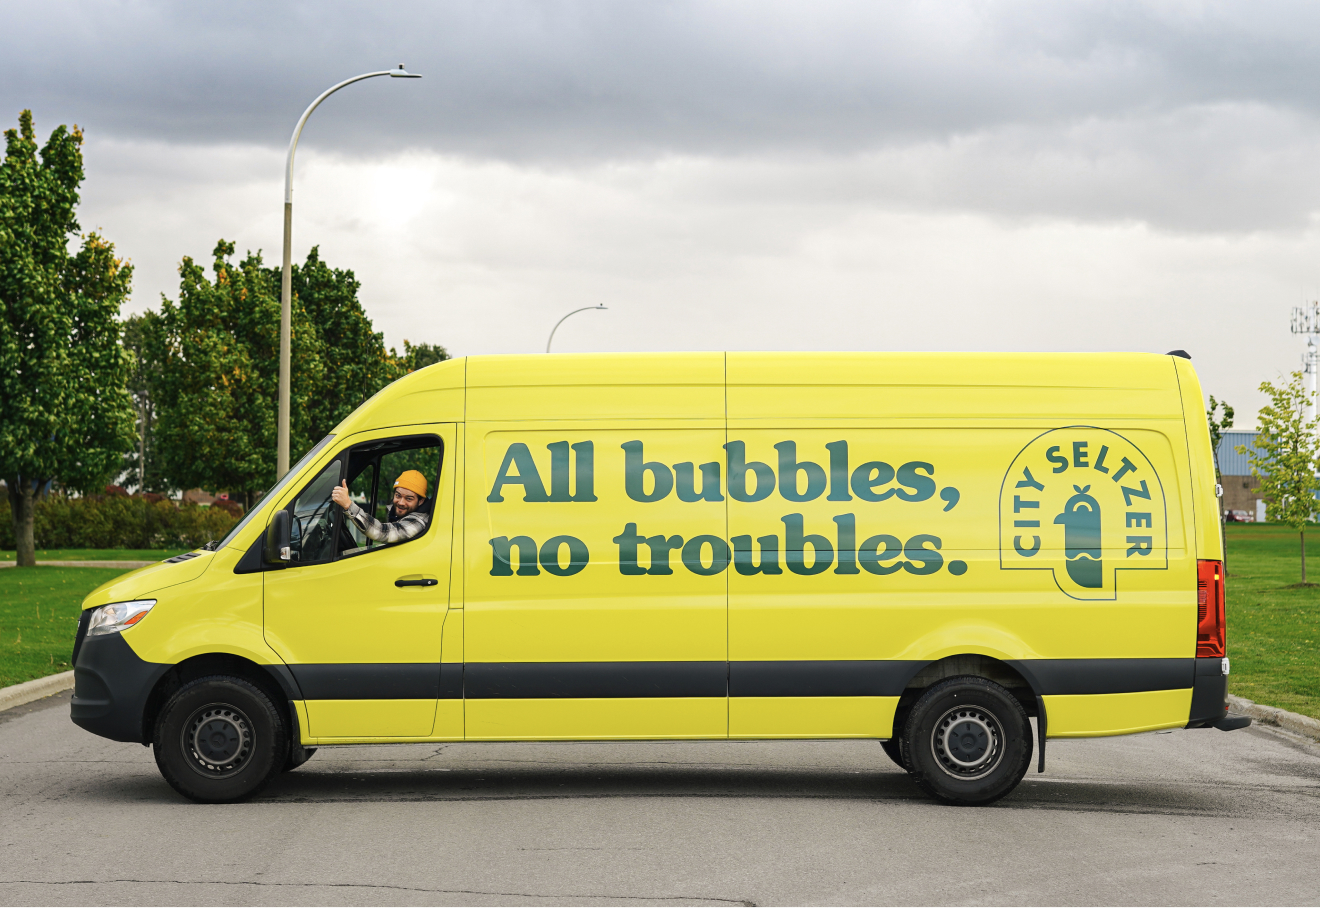 Bright green-on-yellow branded City Seltzer van, featuring the patented "All bubbles no troubles" tagline.